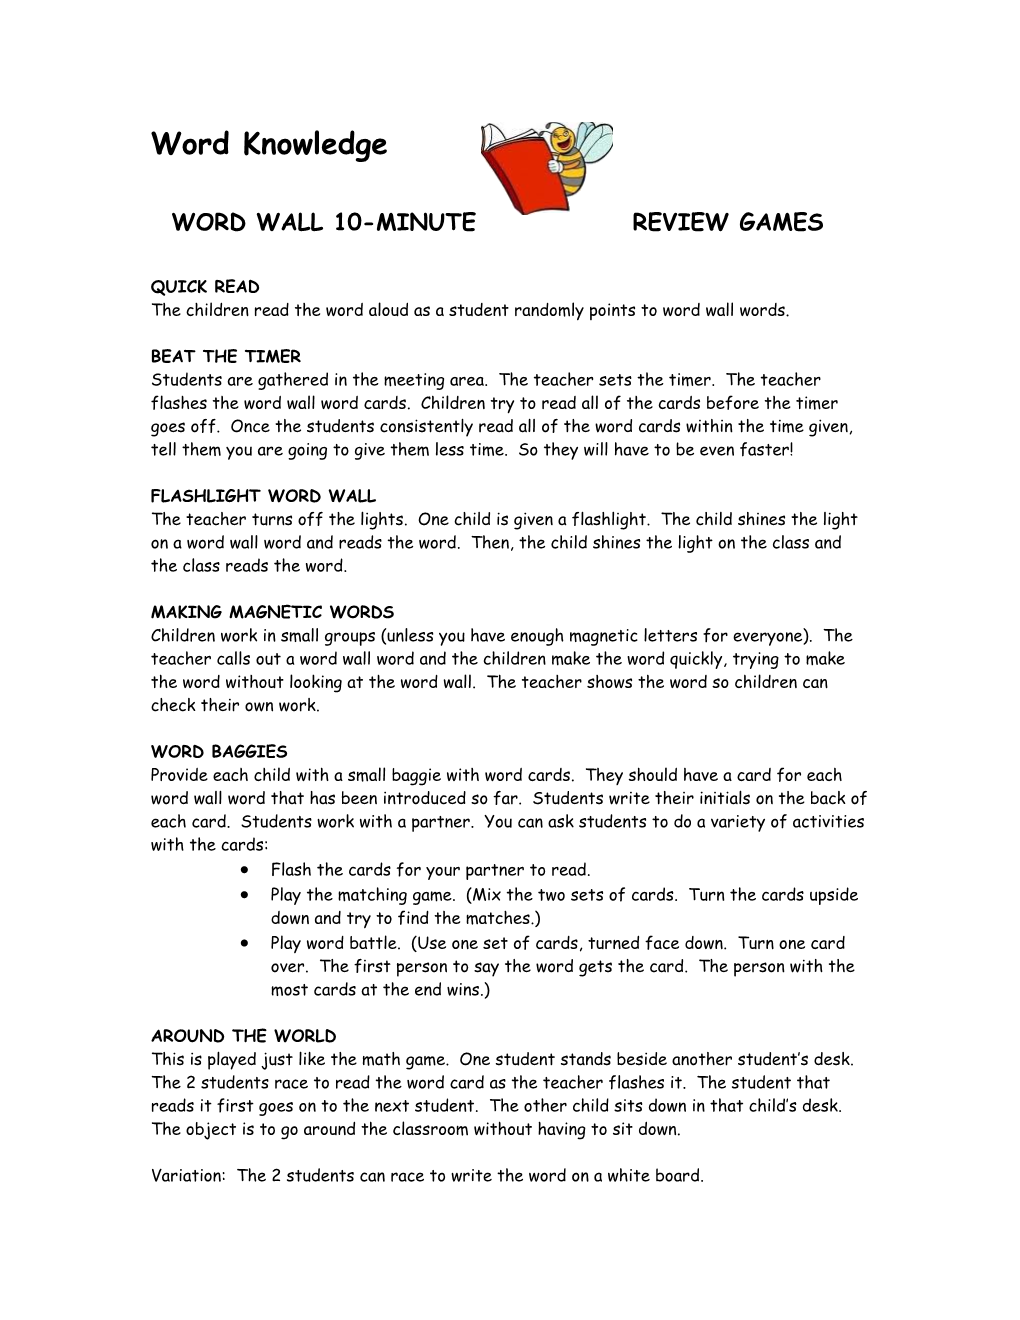 Word Wall 10-Minute Review Games